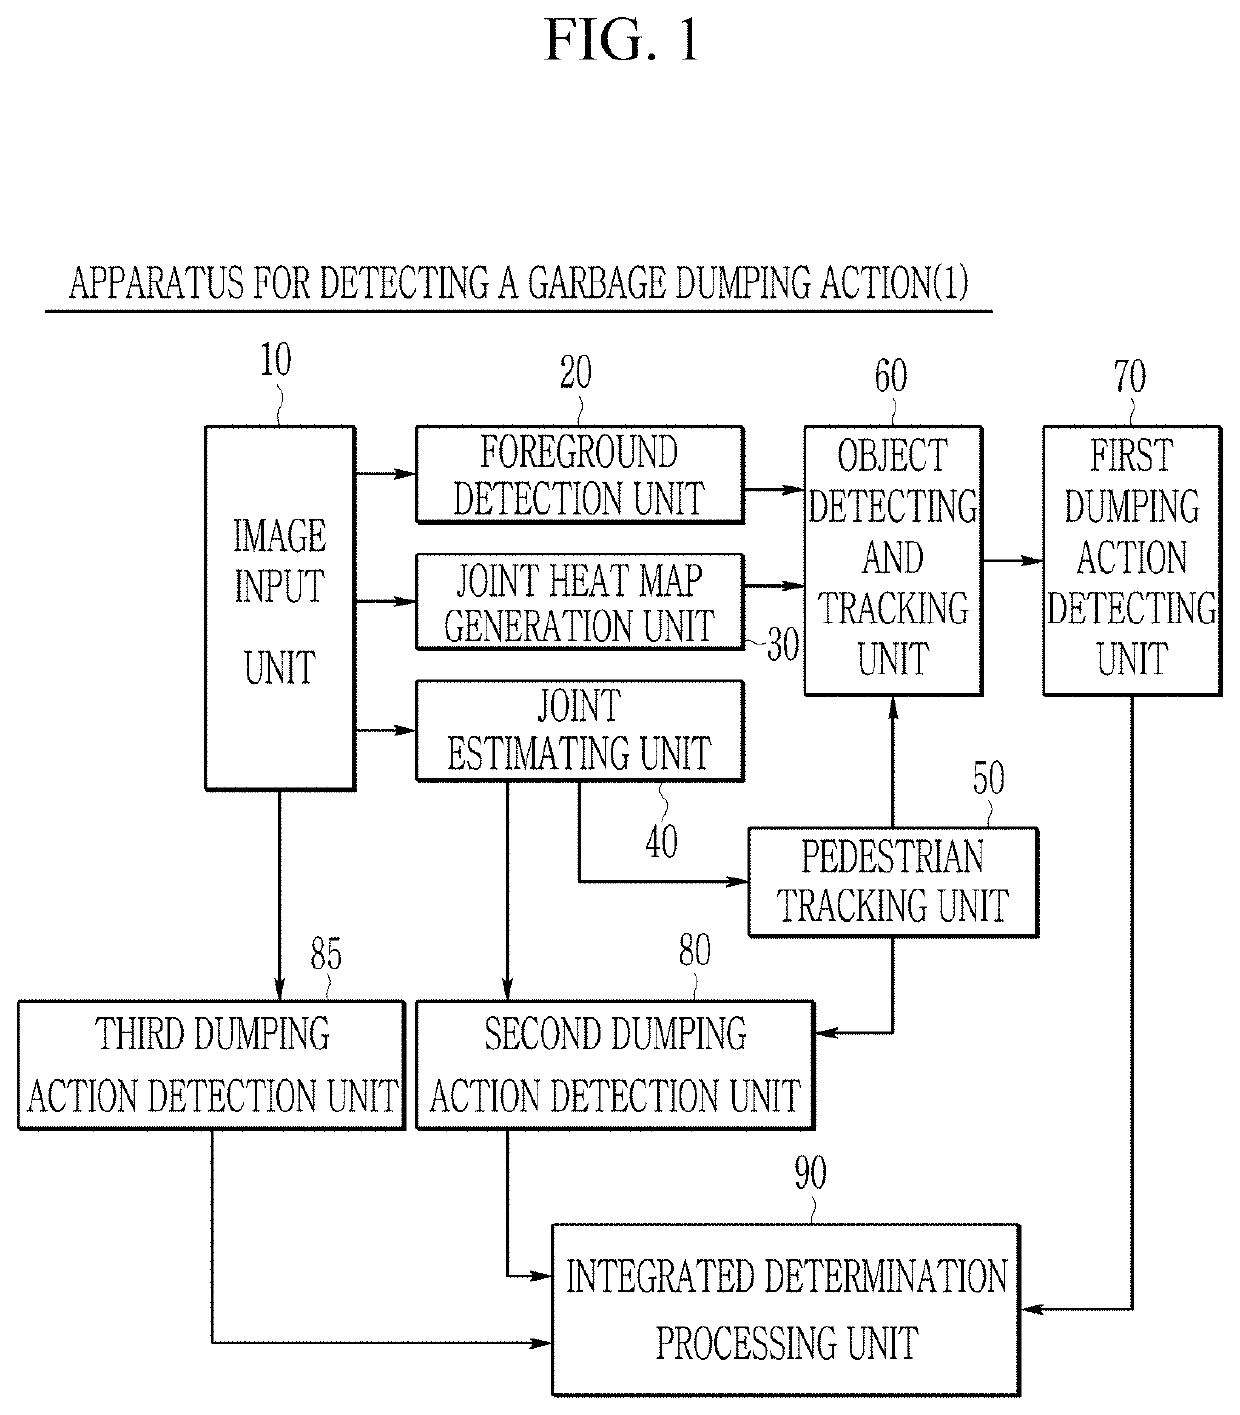 Method and apparatus for detecting a garbage dumping action in real time on video surveillance system